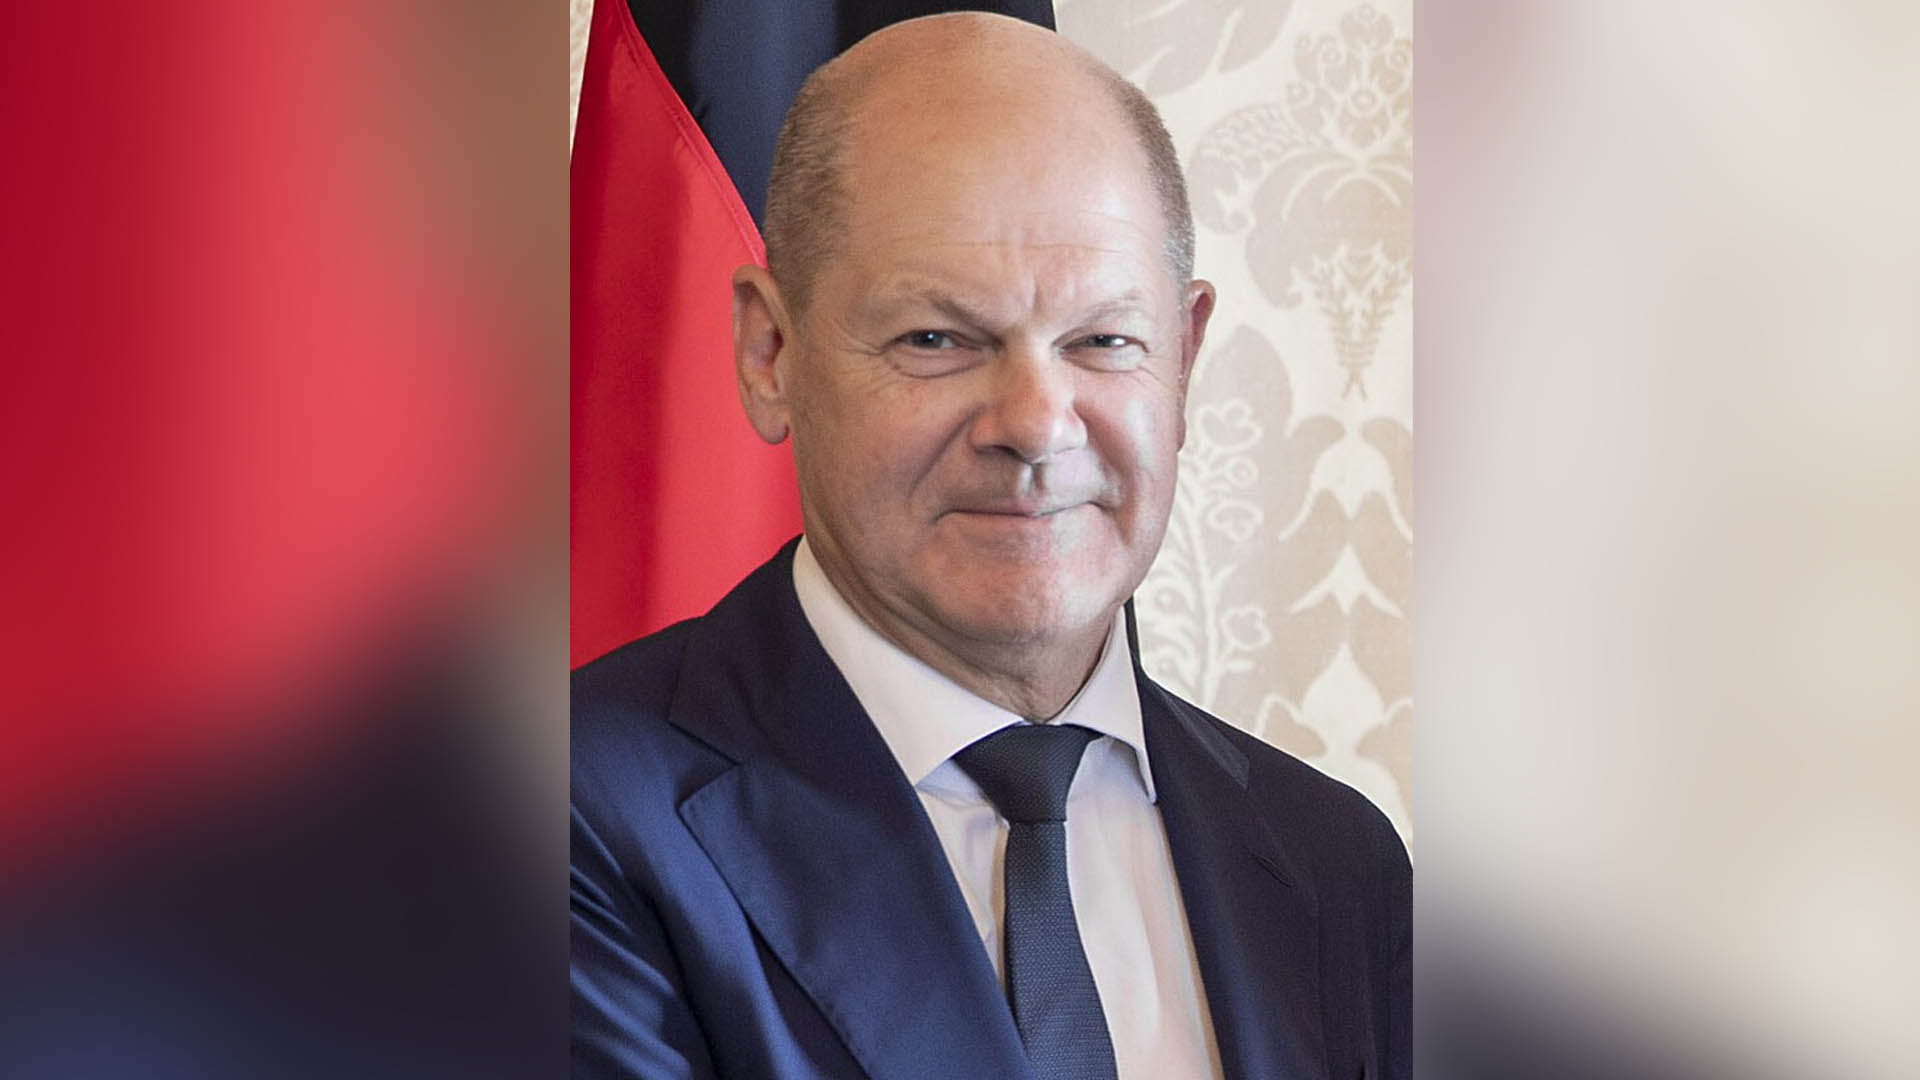 Germany's Scholz calls attacks on politicians outrageous and cowardly